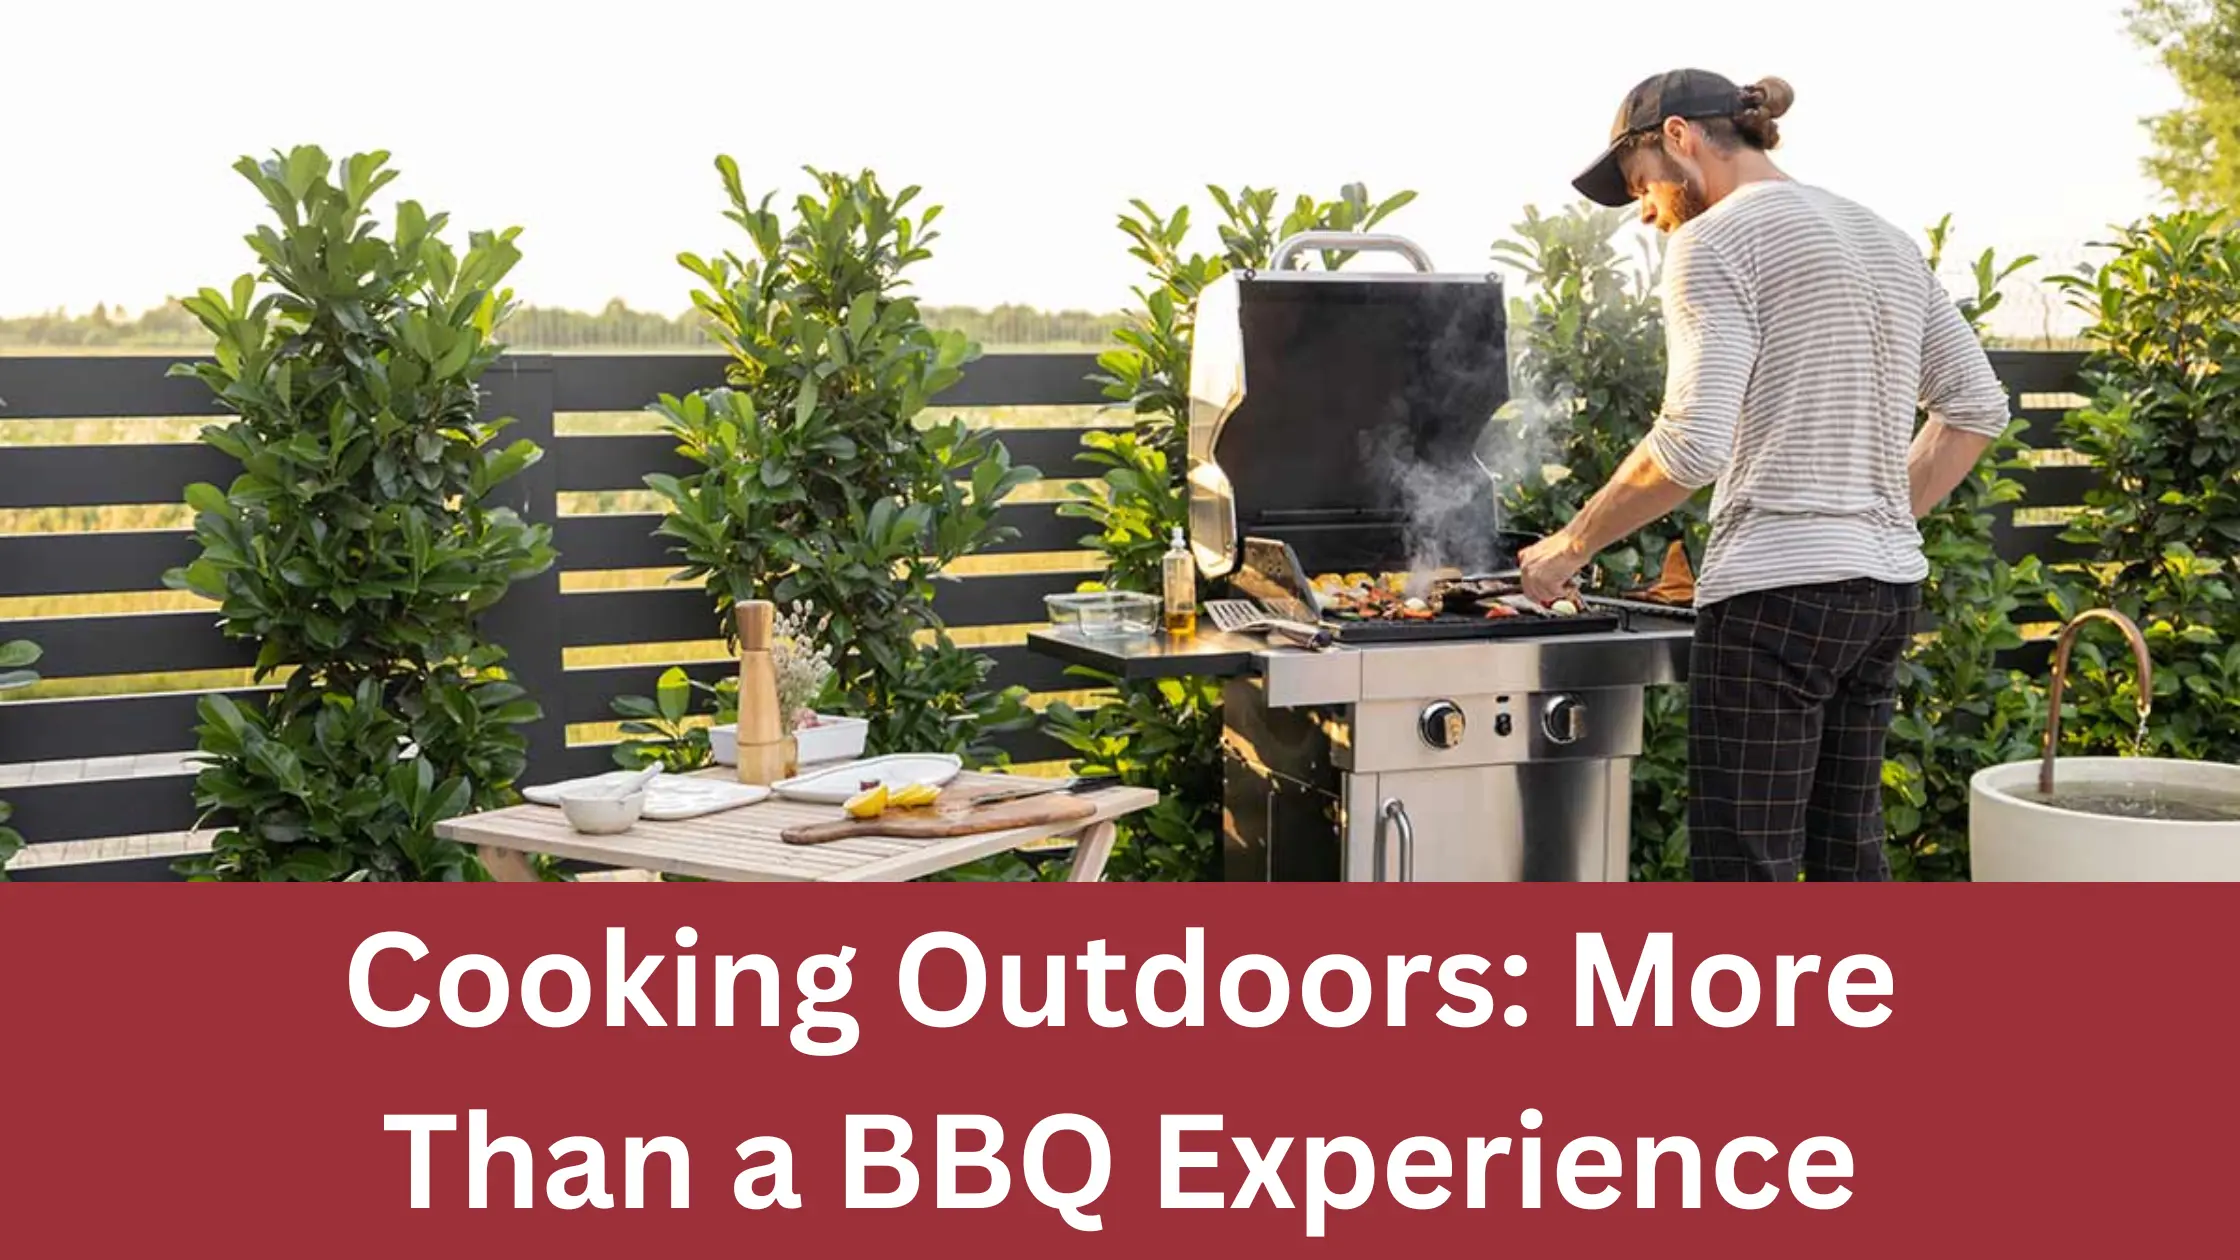 Cooking Outdoors More Than a BBQ Experience